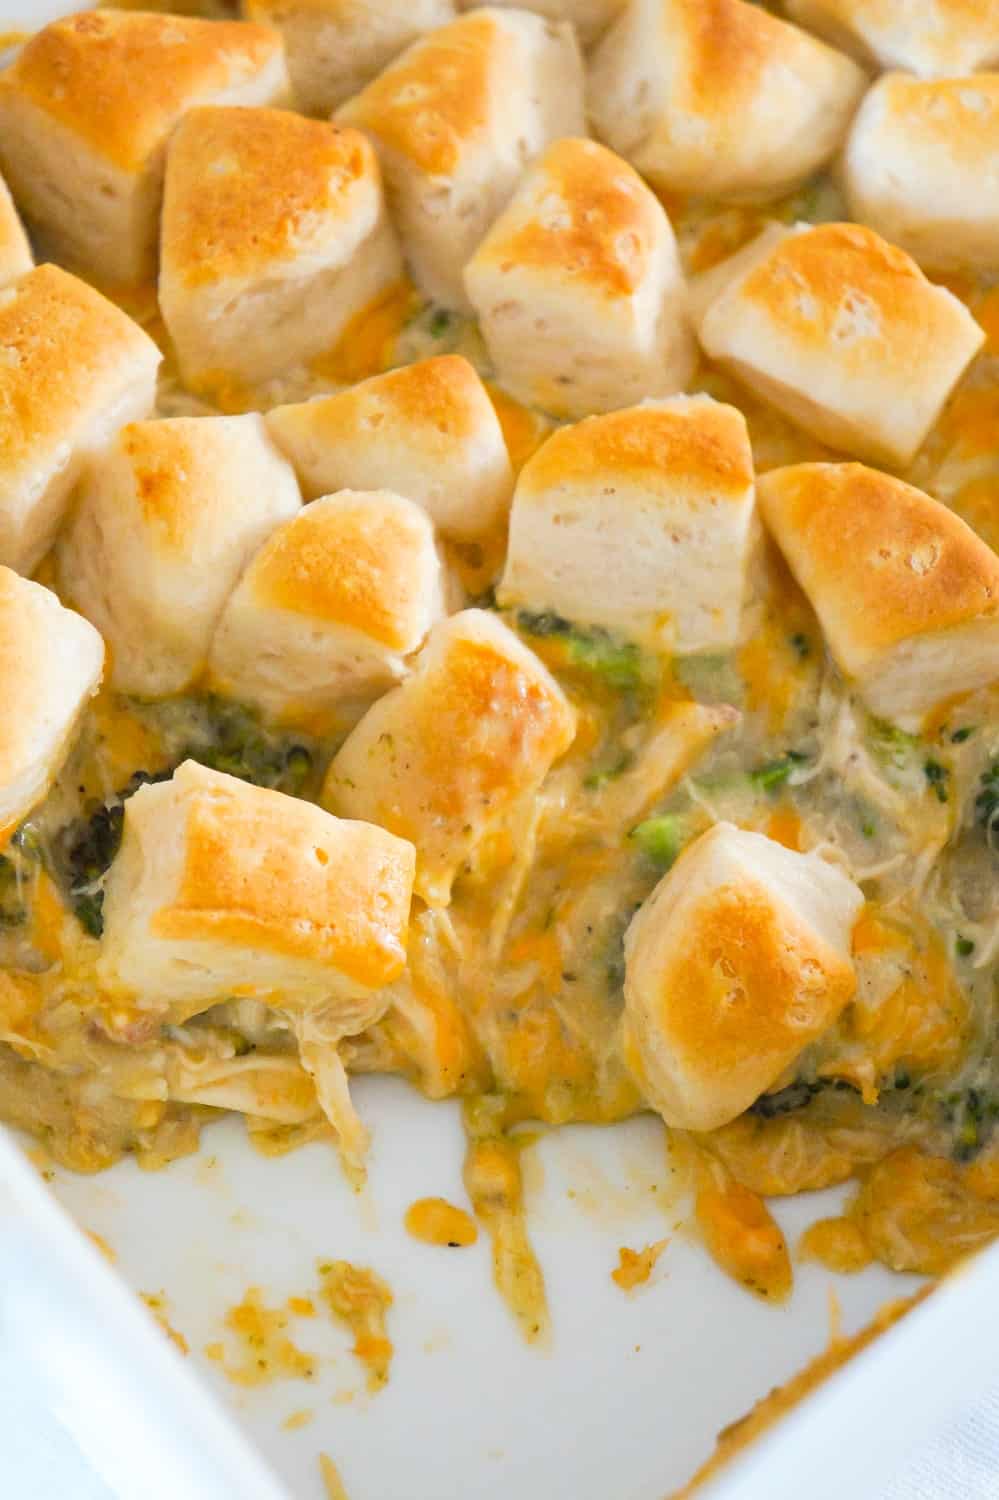 Chicken Casserole With Broccoli And Biscuits This Is Not Diet Food,Posion Ivy On Skin